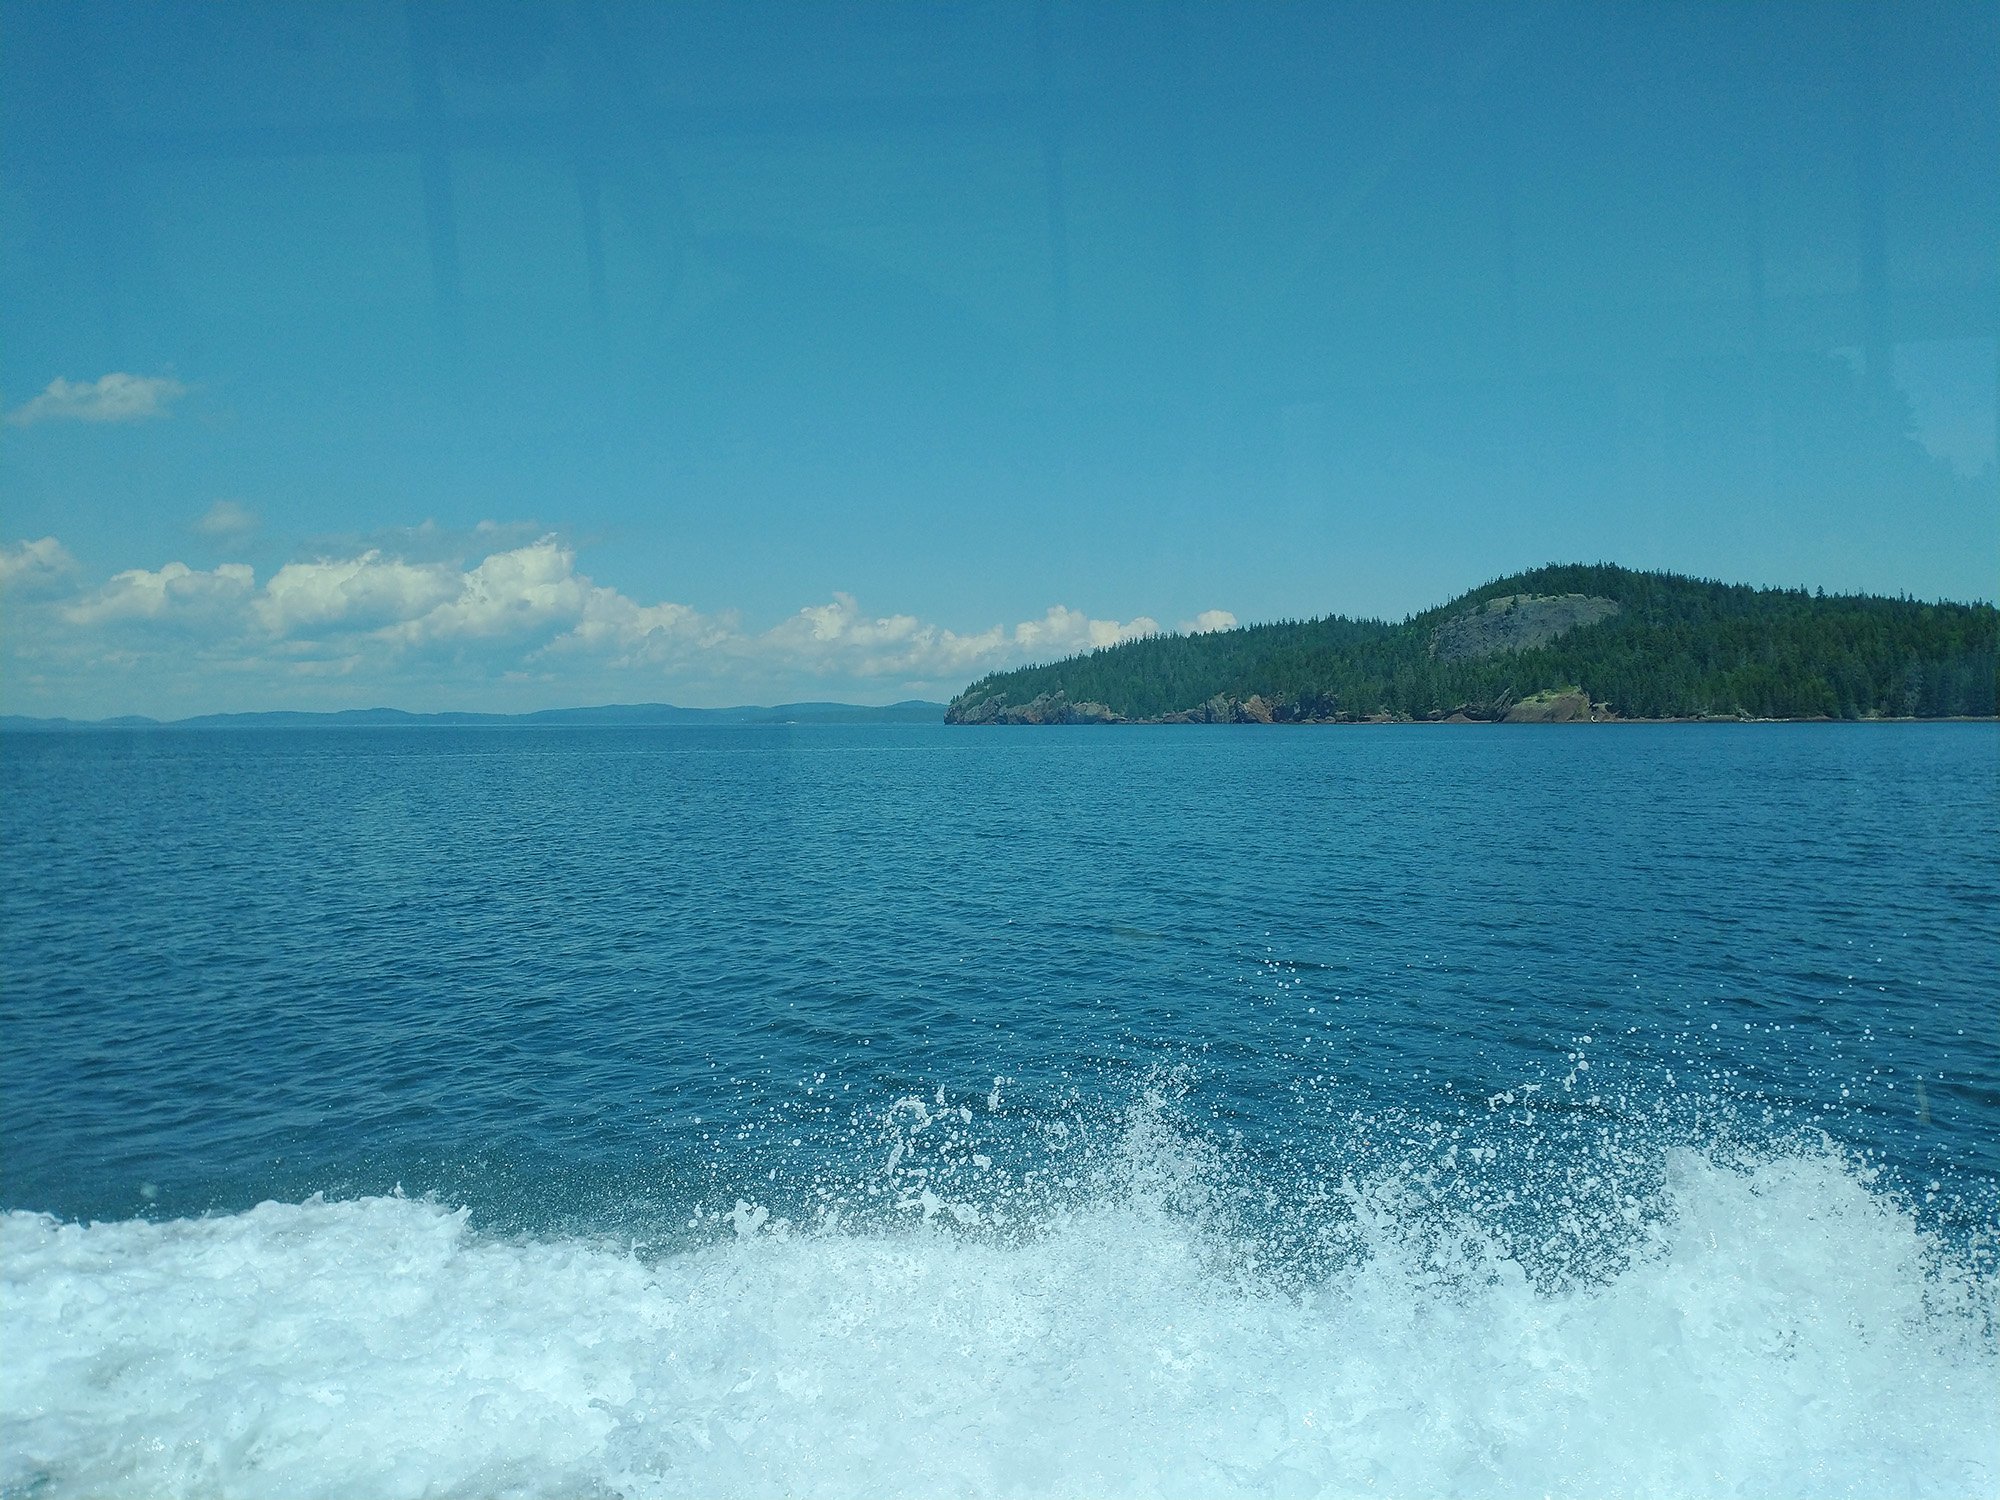 View of some of the many islands, from inside the boat.